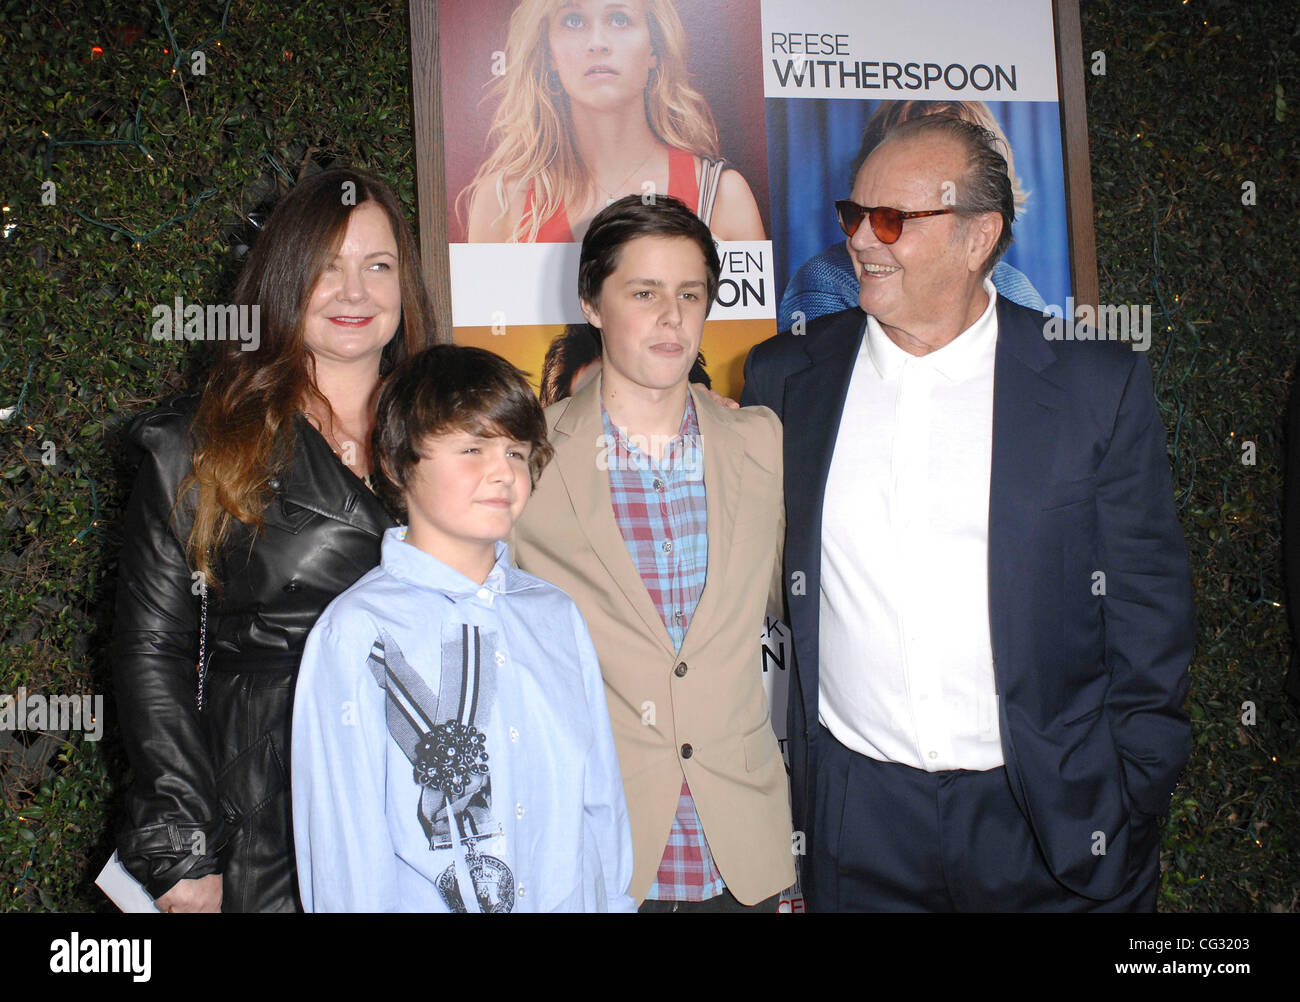 Jack Nicholson with Jennifer Nicholson and her sons The Premiere of 'How Do You Know' held at Regency Village Theatre Los Angeles, California - 13.12.10 Stock Photo